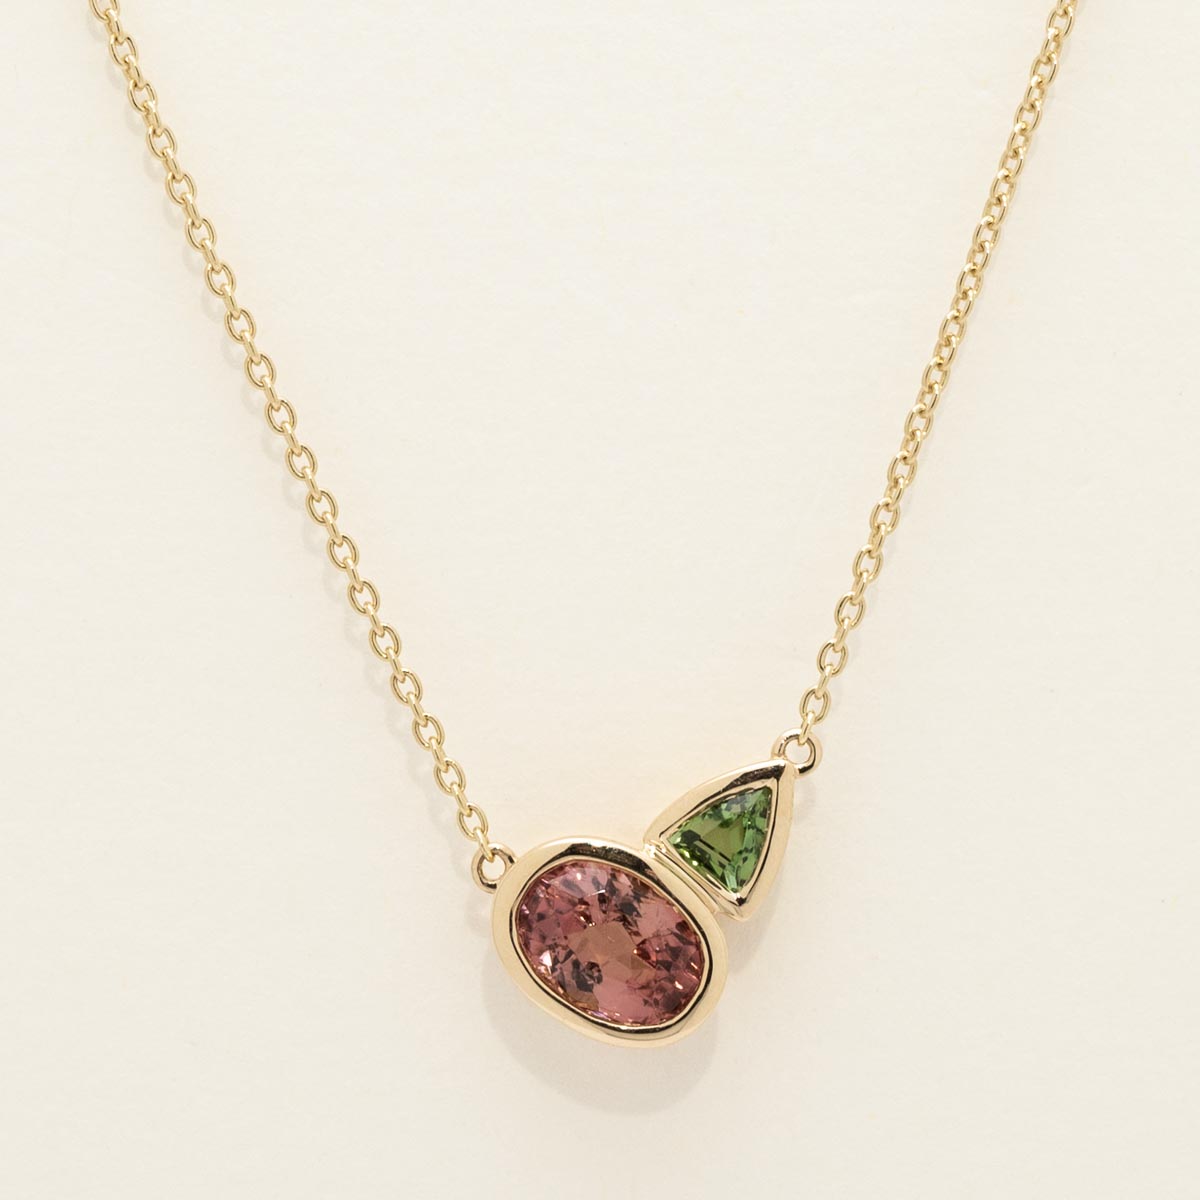 Maine Pink and Green Tourmaline Bezel Necklace in 14kt Yellow Gold